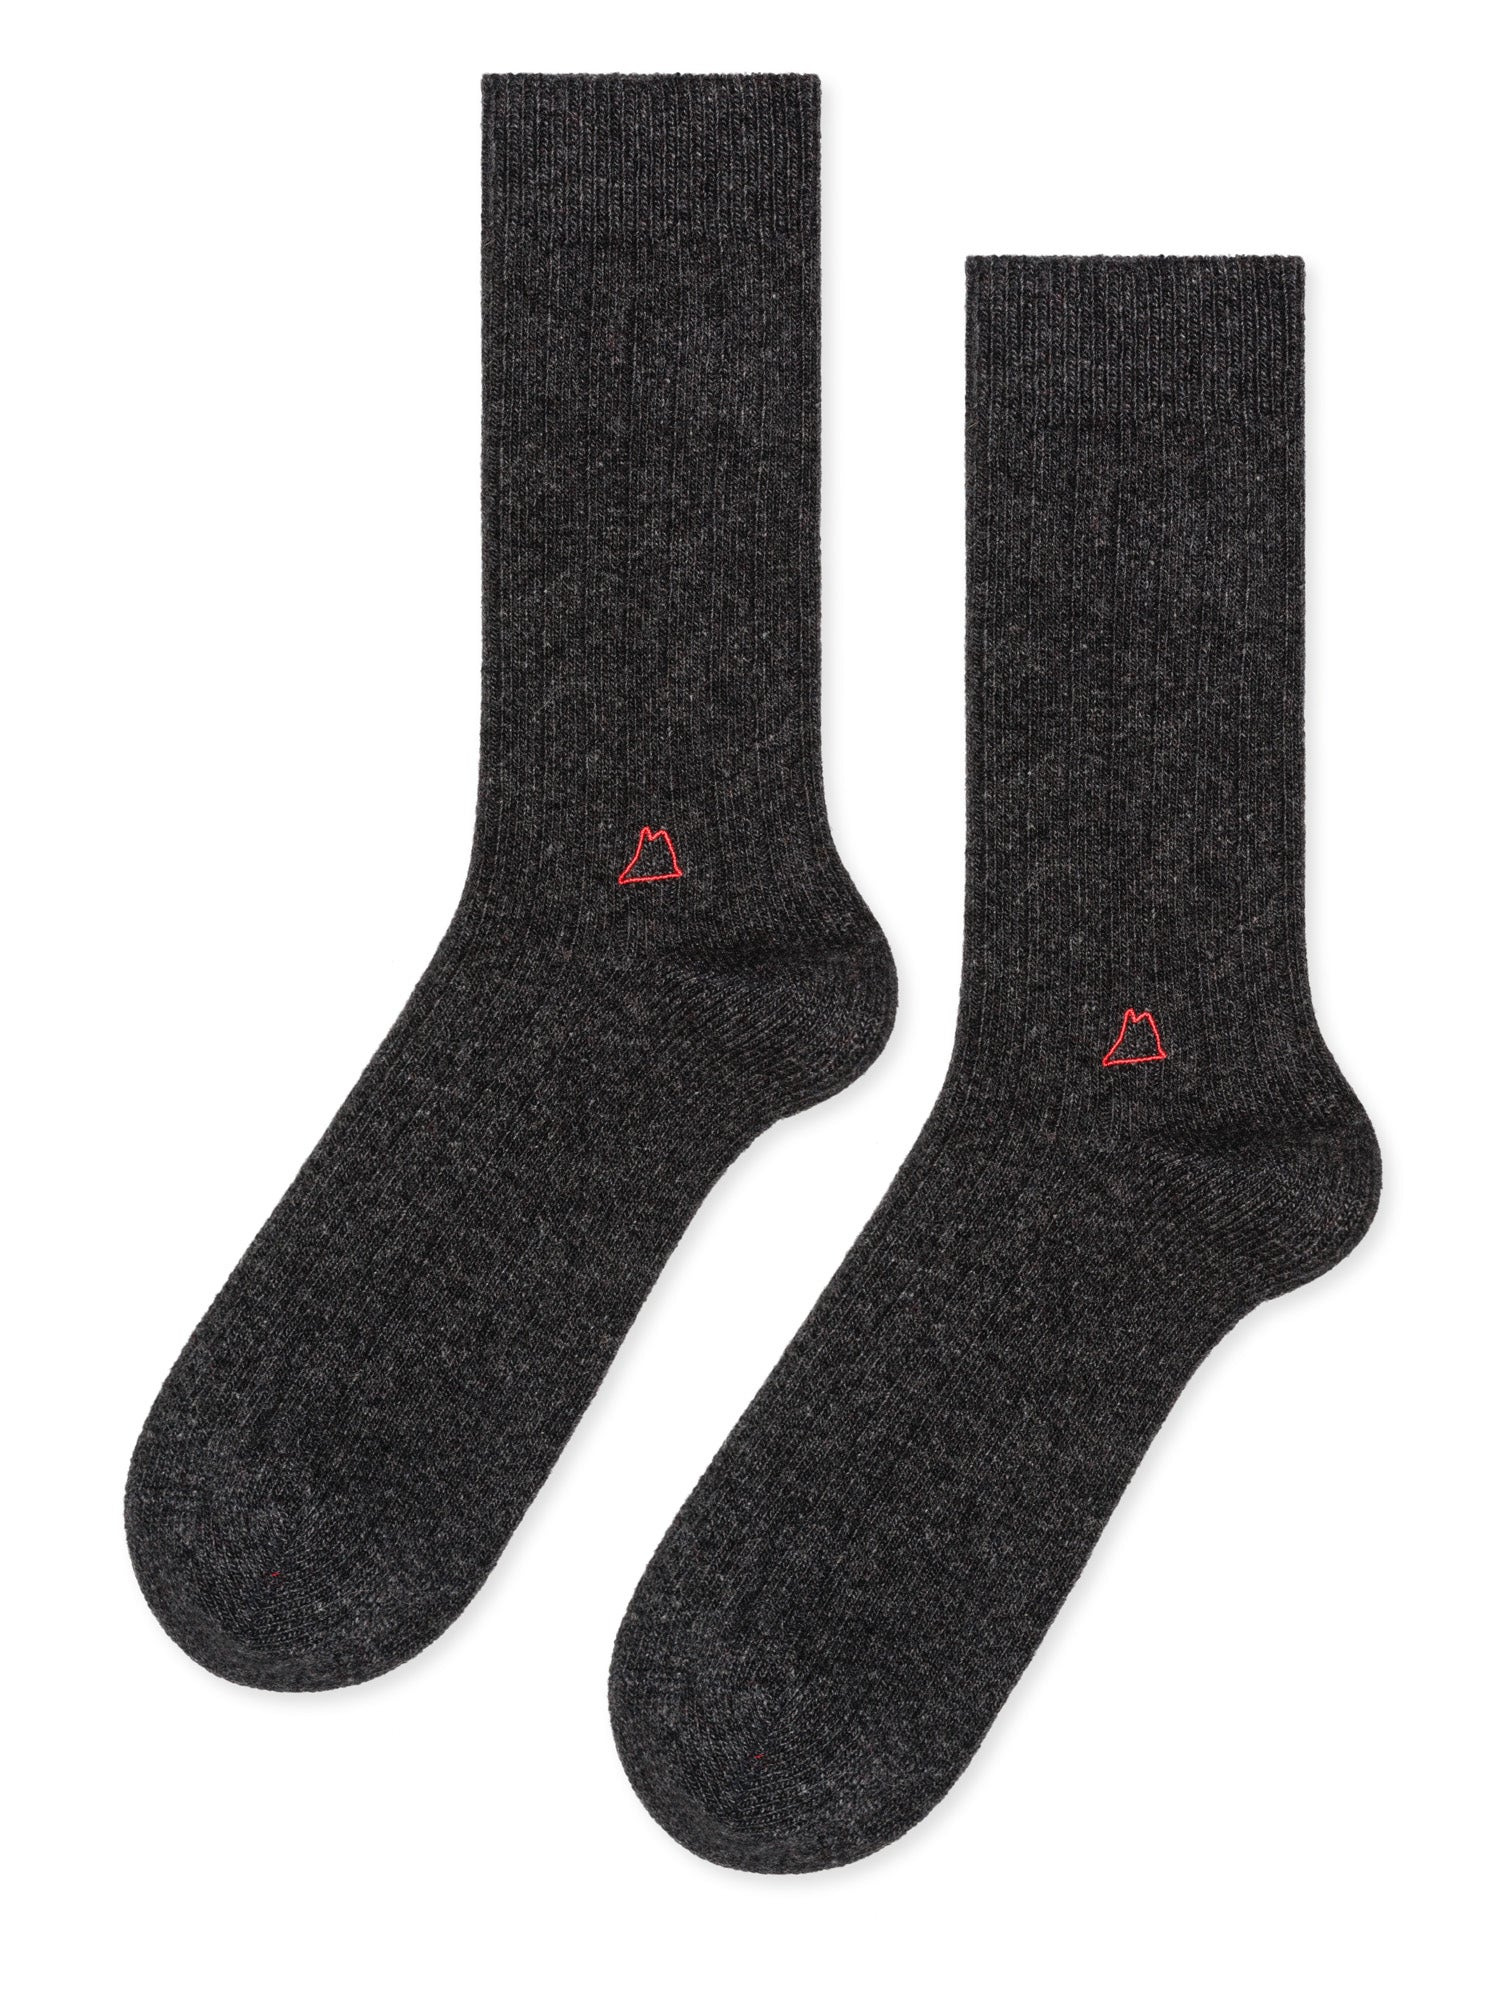 gray cashmere socks lay flat against a white background. 